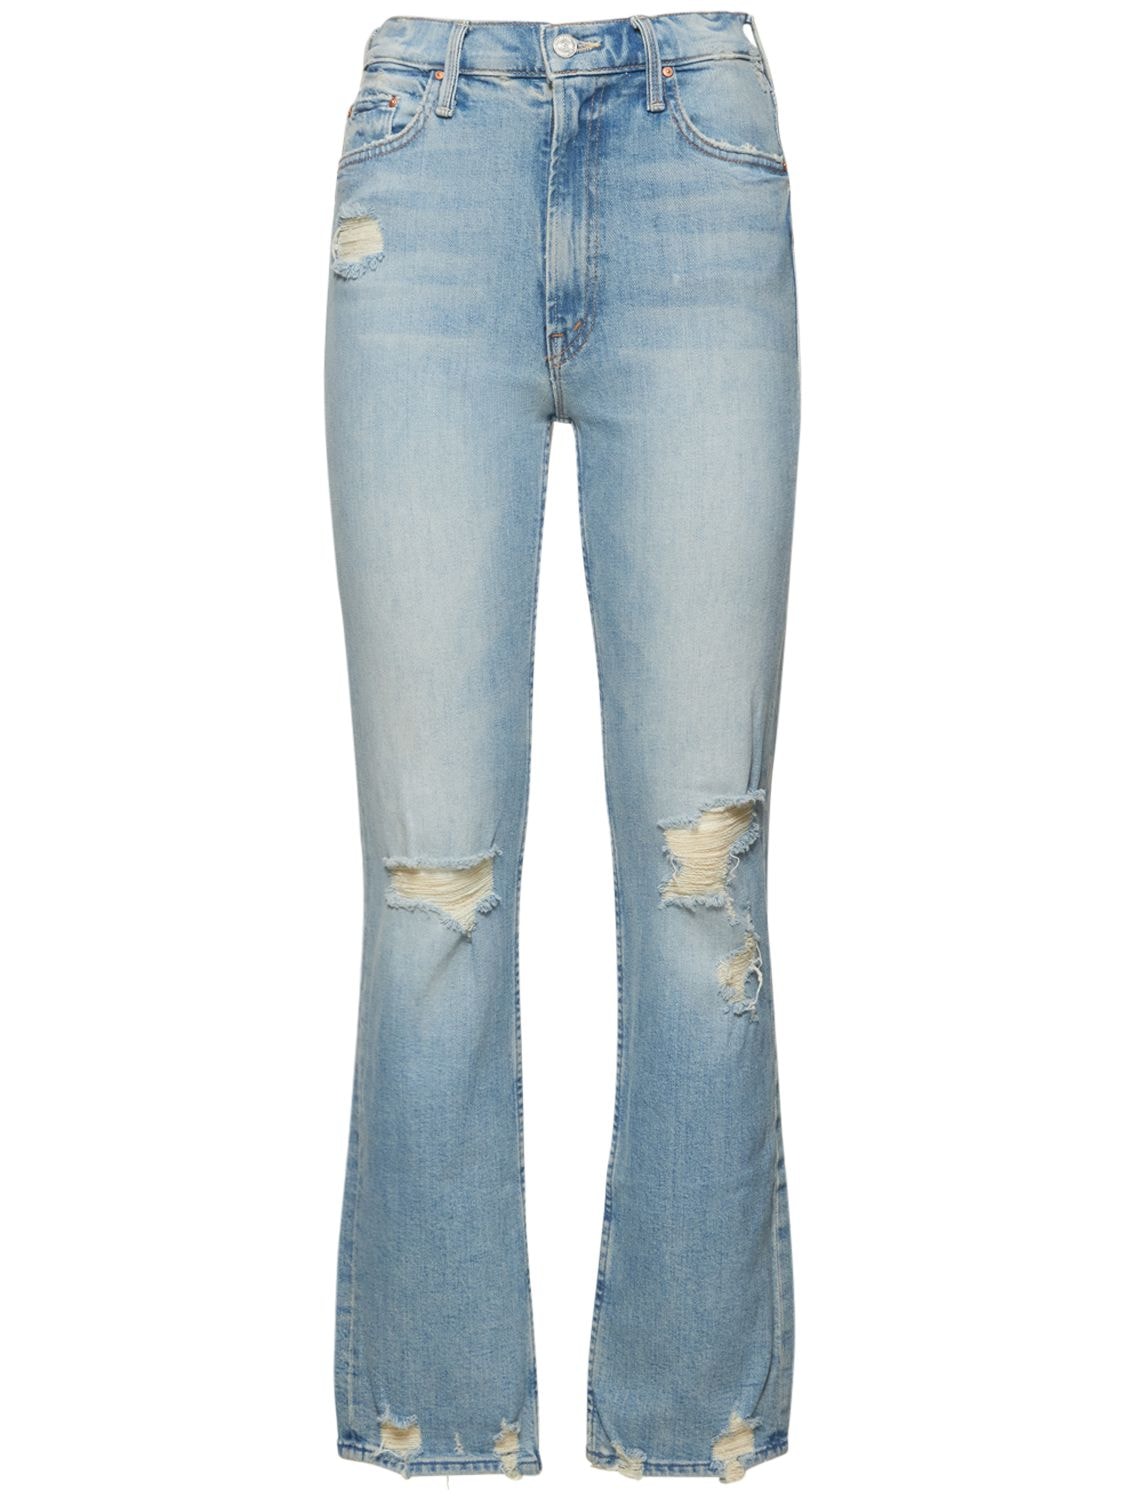 The Rider High Rise Cotton Blend Jeans – WOMEN > CLOTHING > JEANS